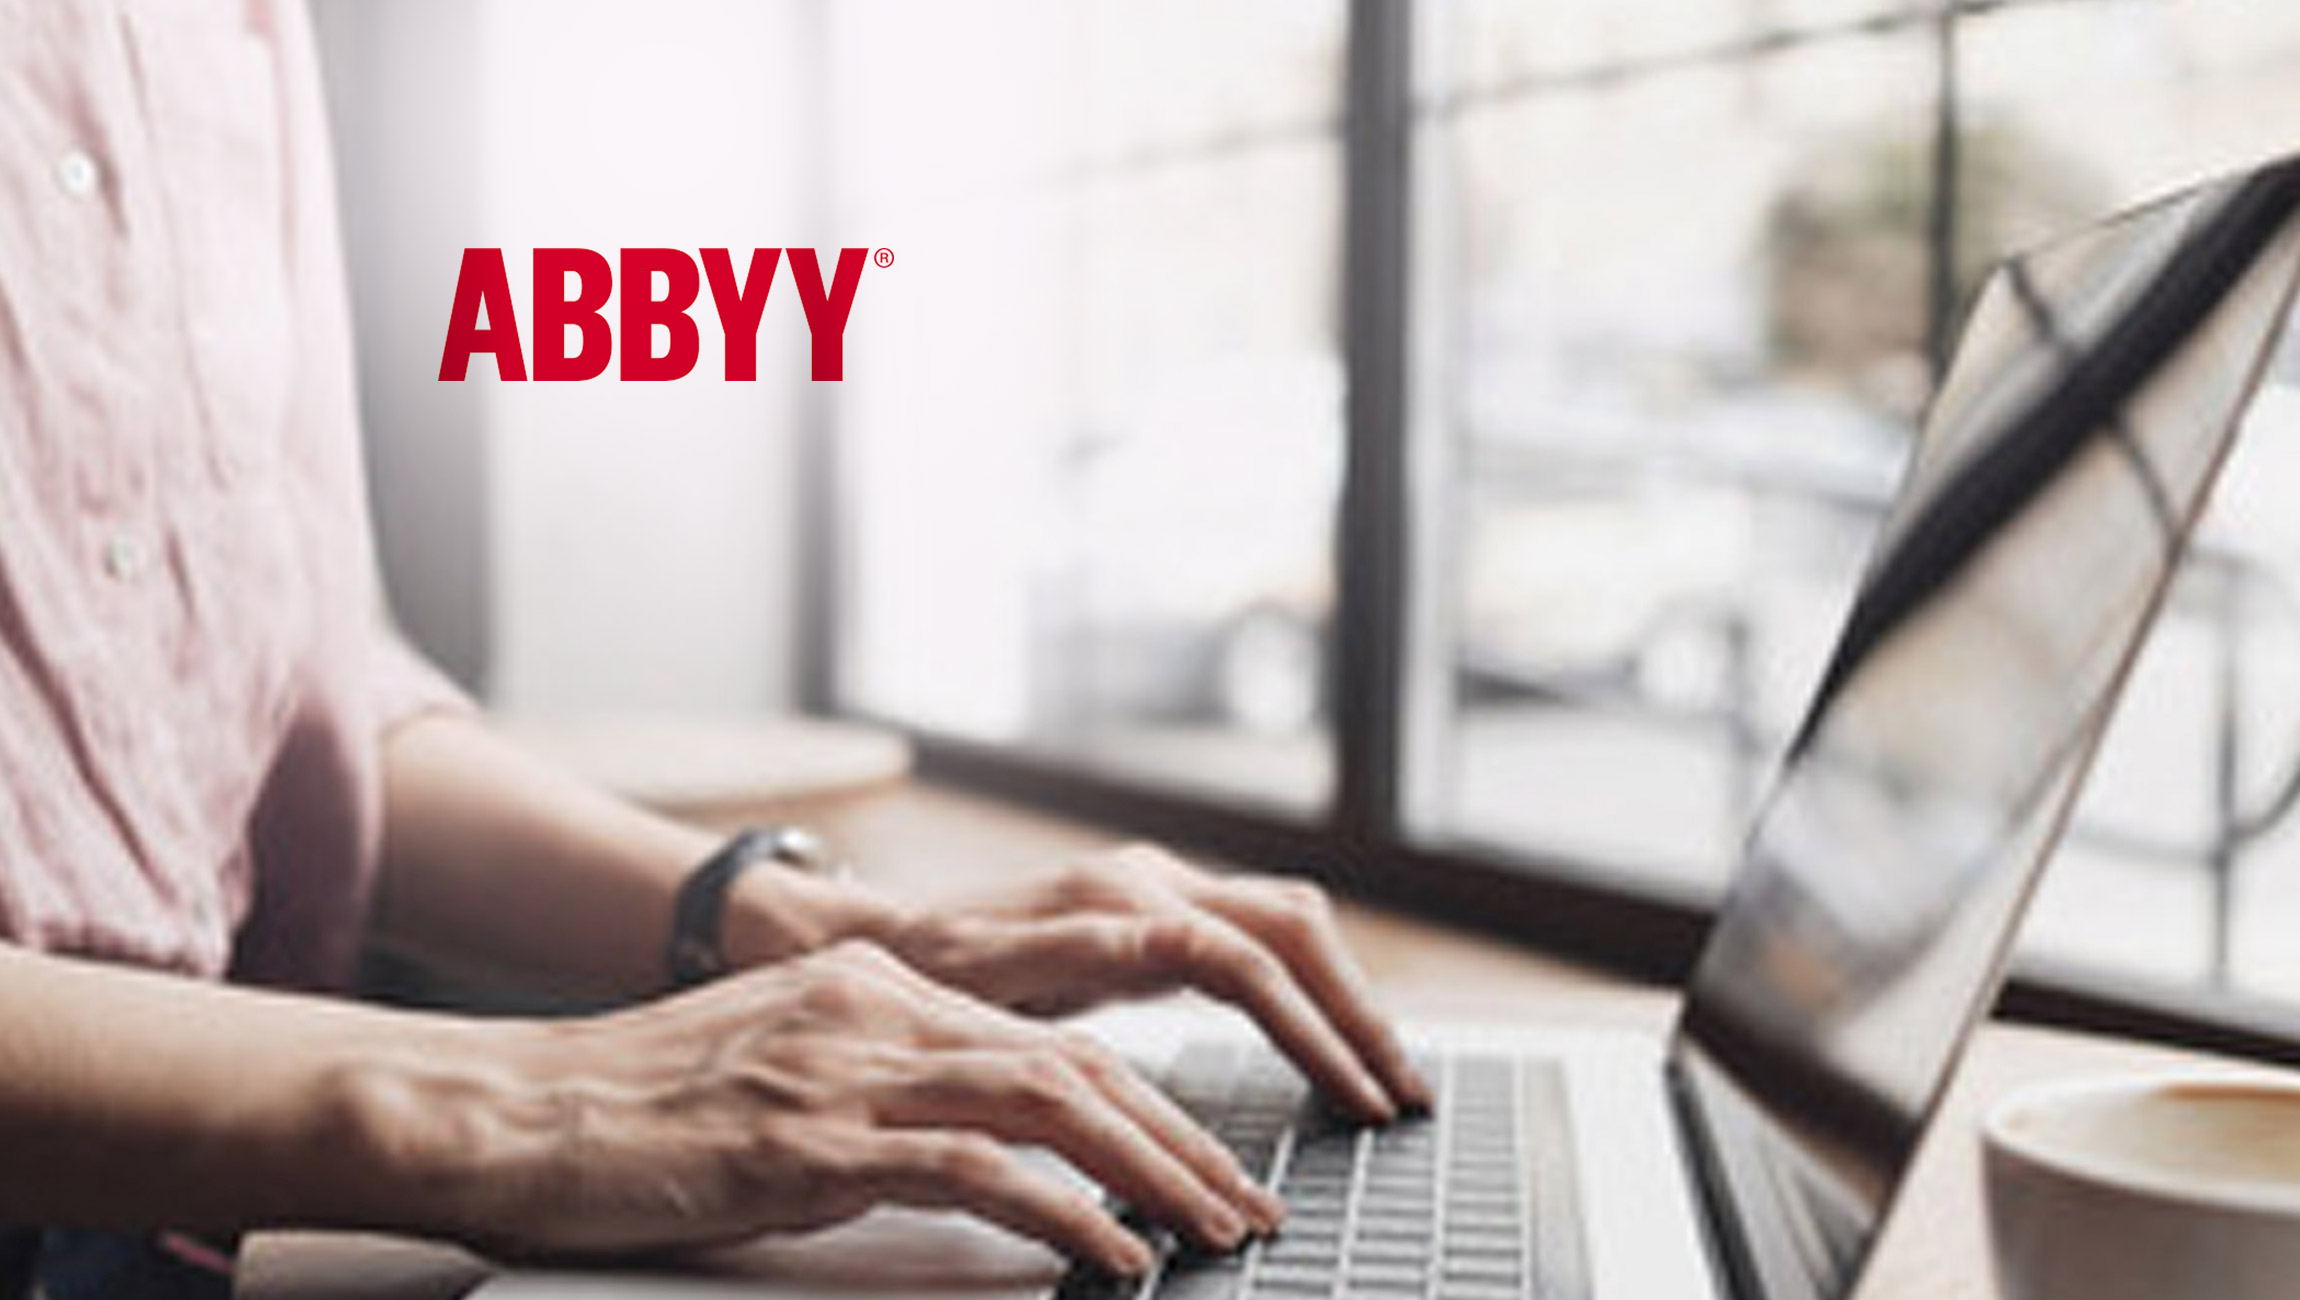 ABBYY Named 2021 Leader in Intelligent Document Processing by ISG and Quadrant Knowledge Solutions